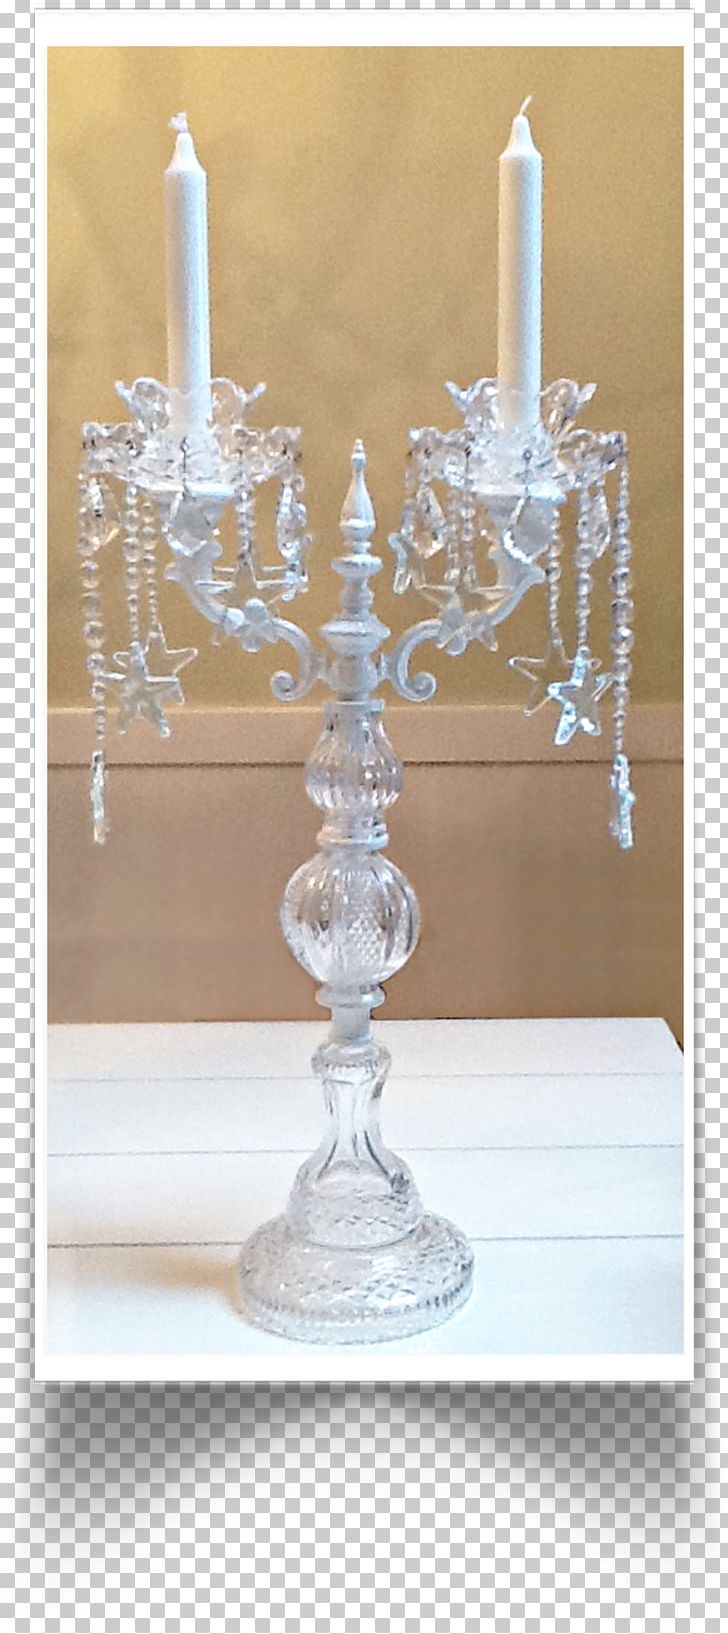 Candle Candelabra Menorah Centrepiece Lighting PNG, Clipart, Cake, Cake Stand, Candelabra, Candle, Candle Holder Free PNG Download